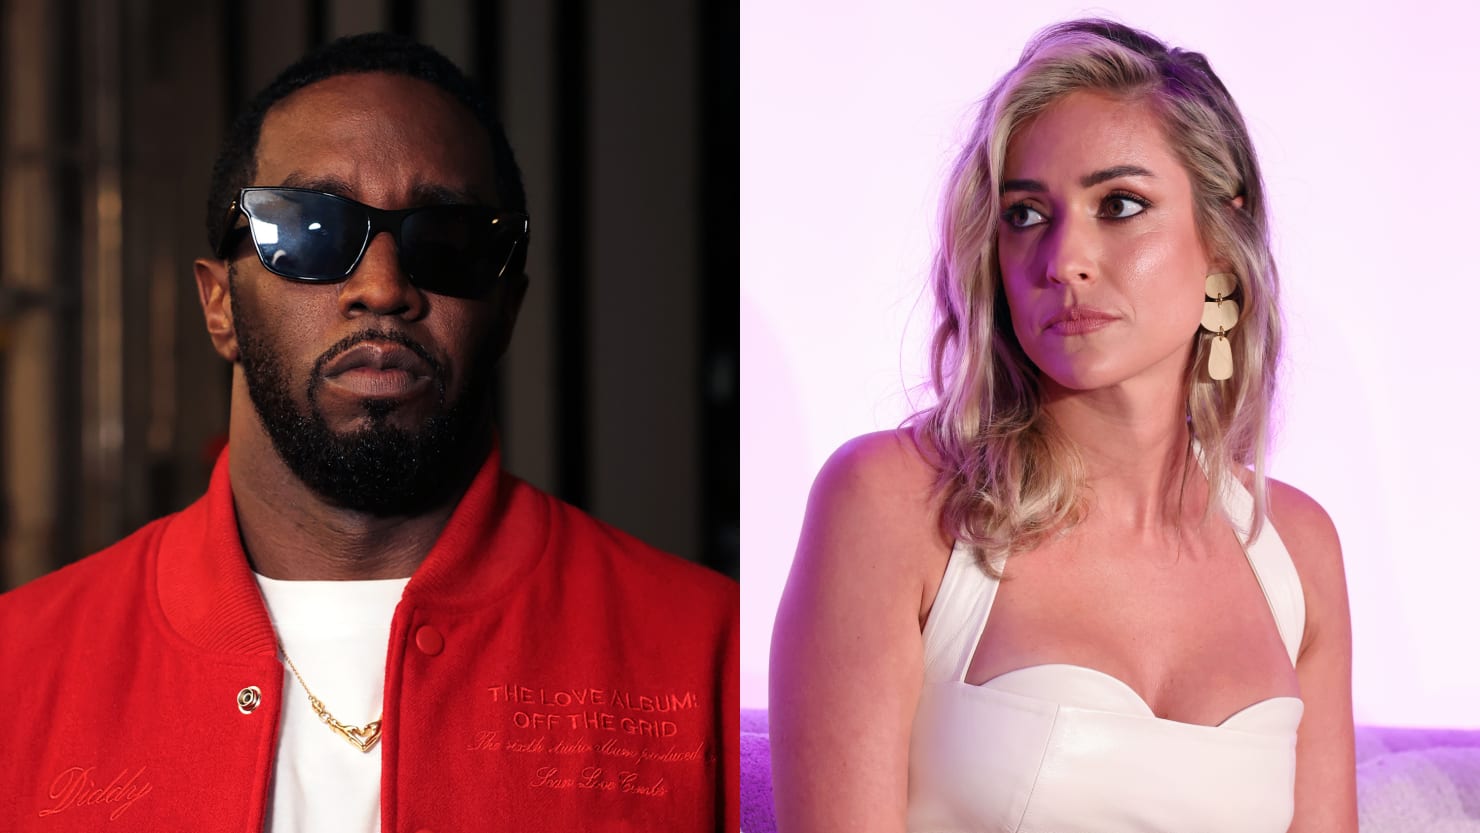 Kristin Cavallari Rejected Sean 'Diddy' Combs In Her 20s